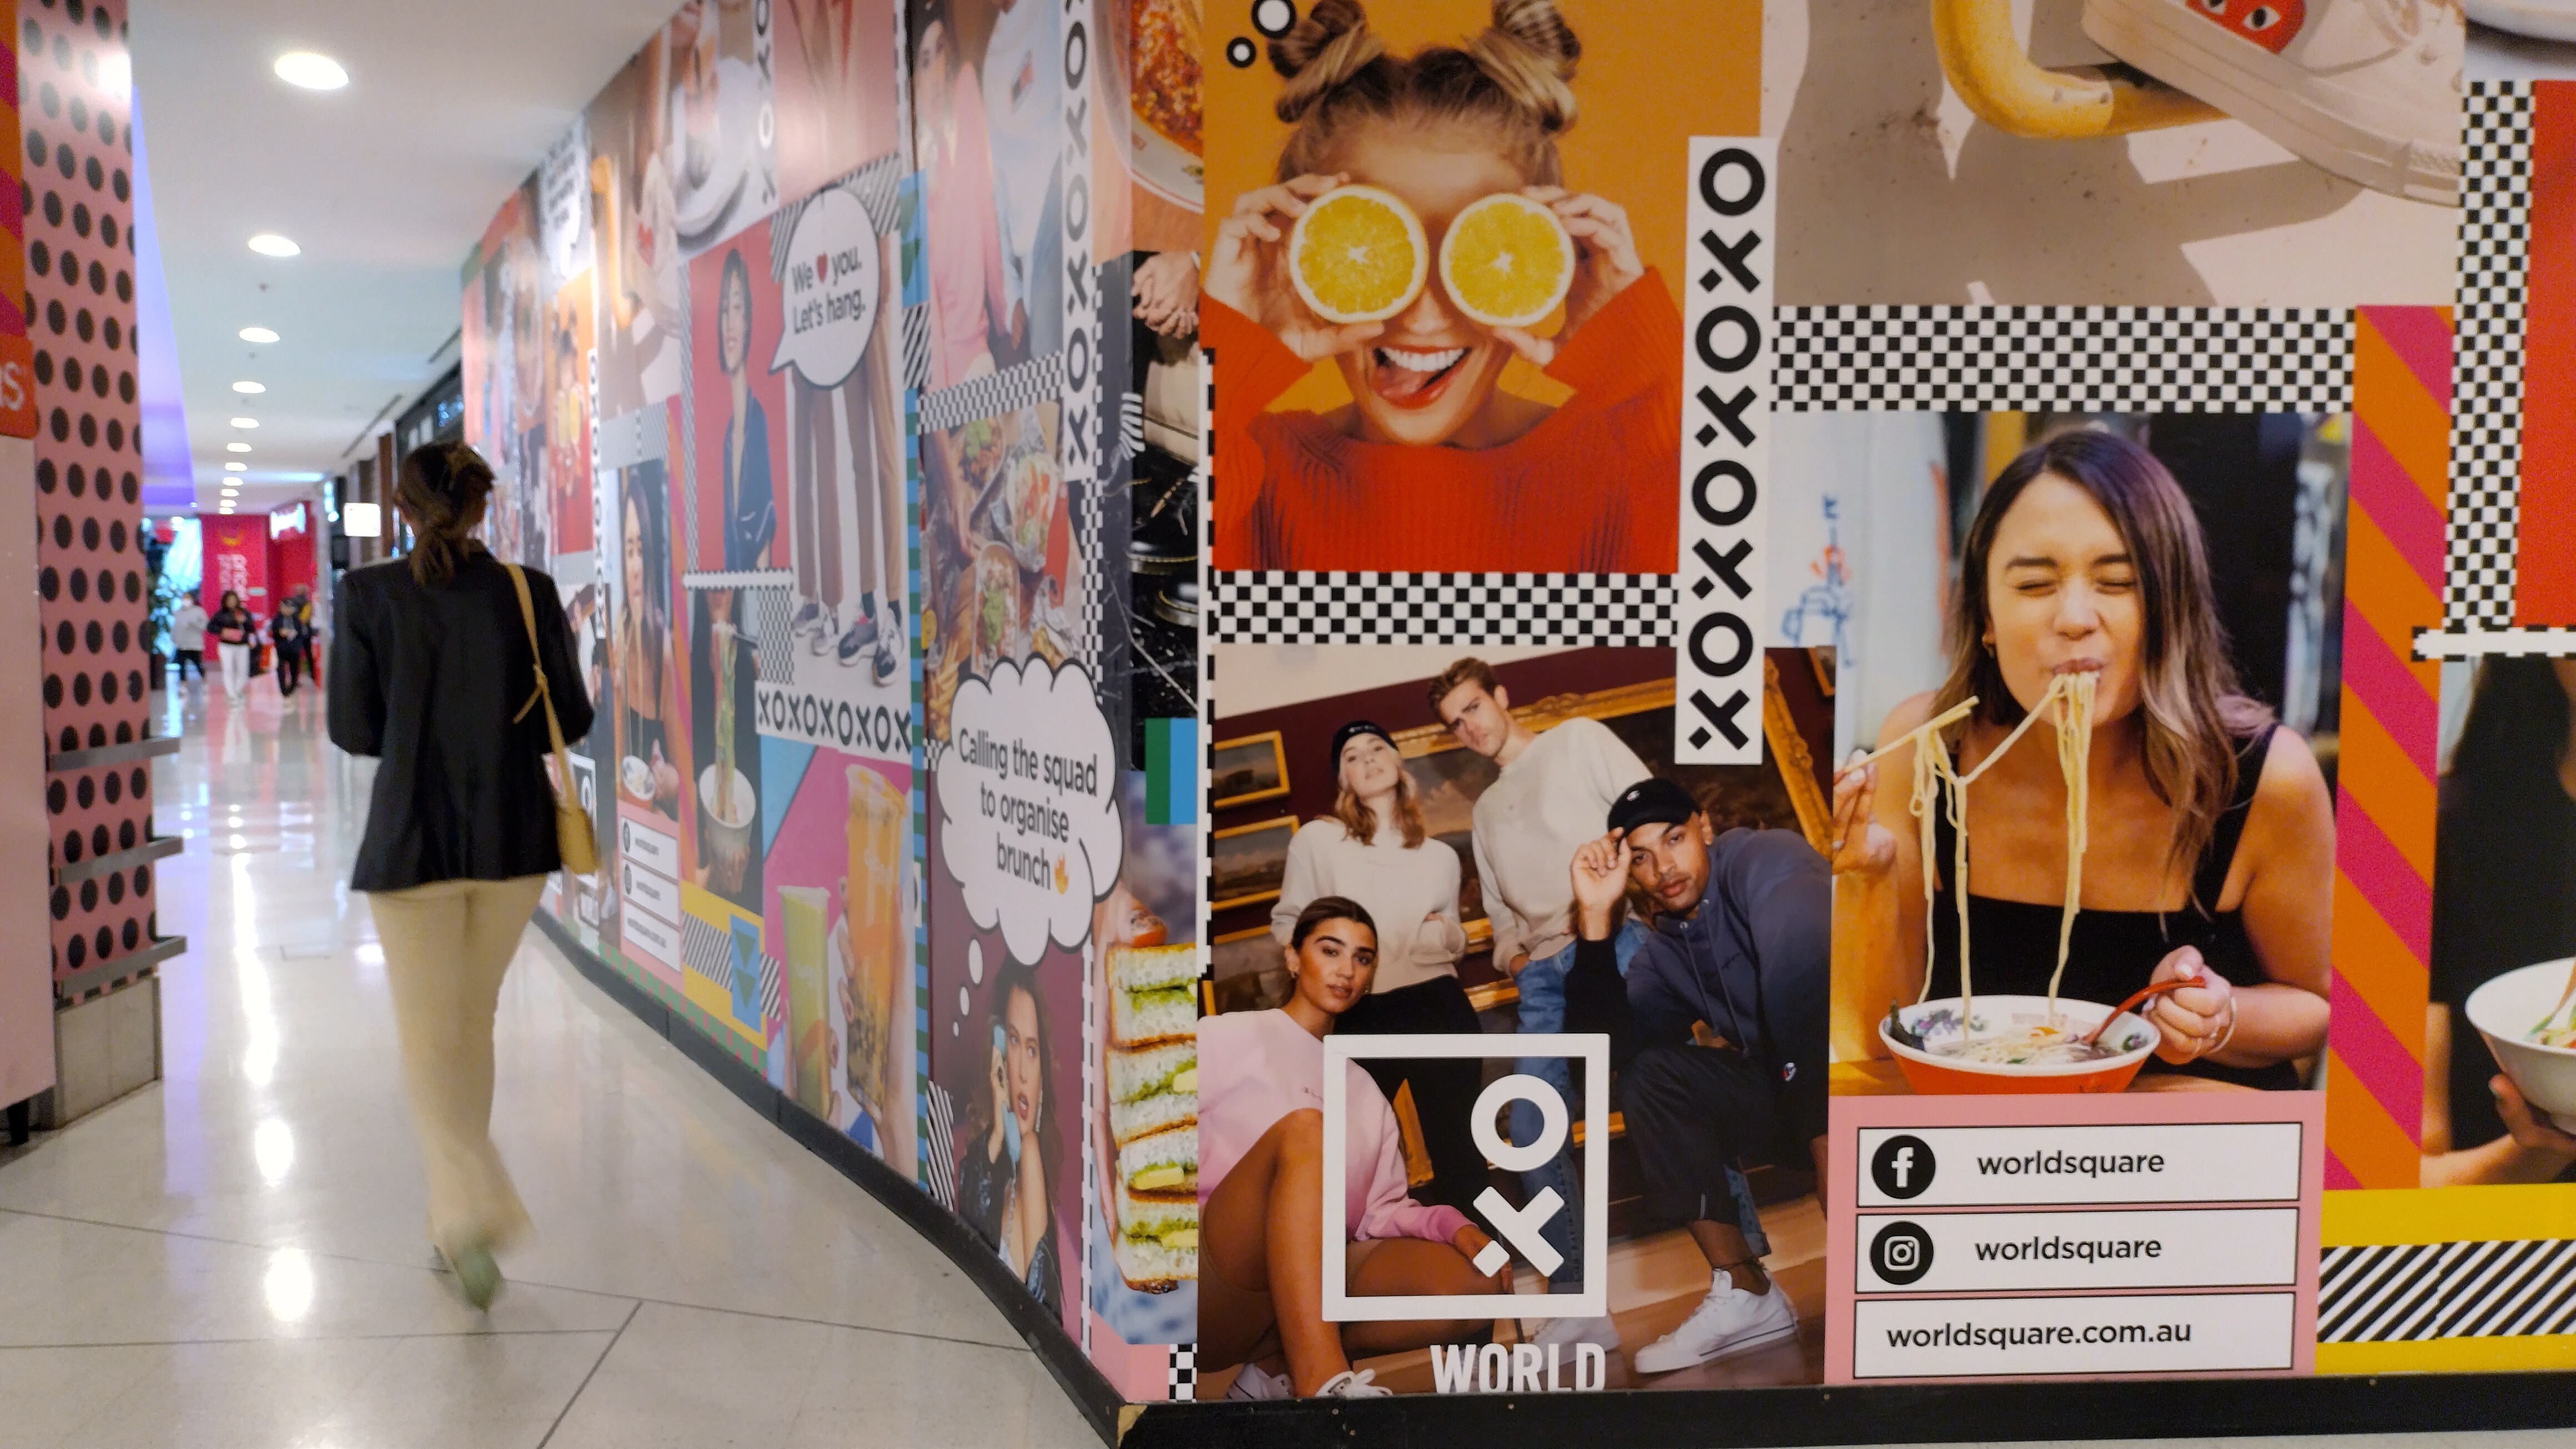 A temporary wall as advertisement in World Square, downtown Sydney